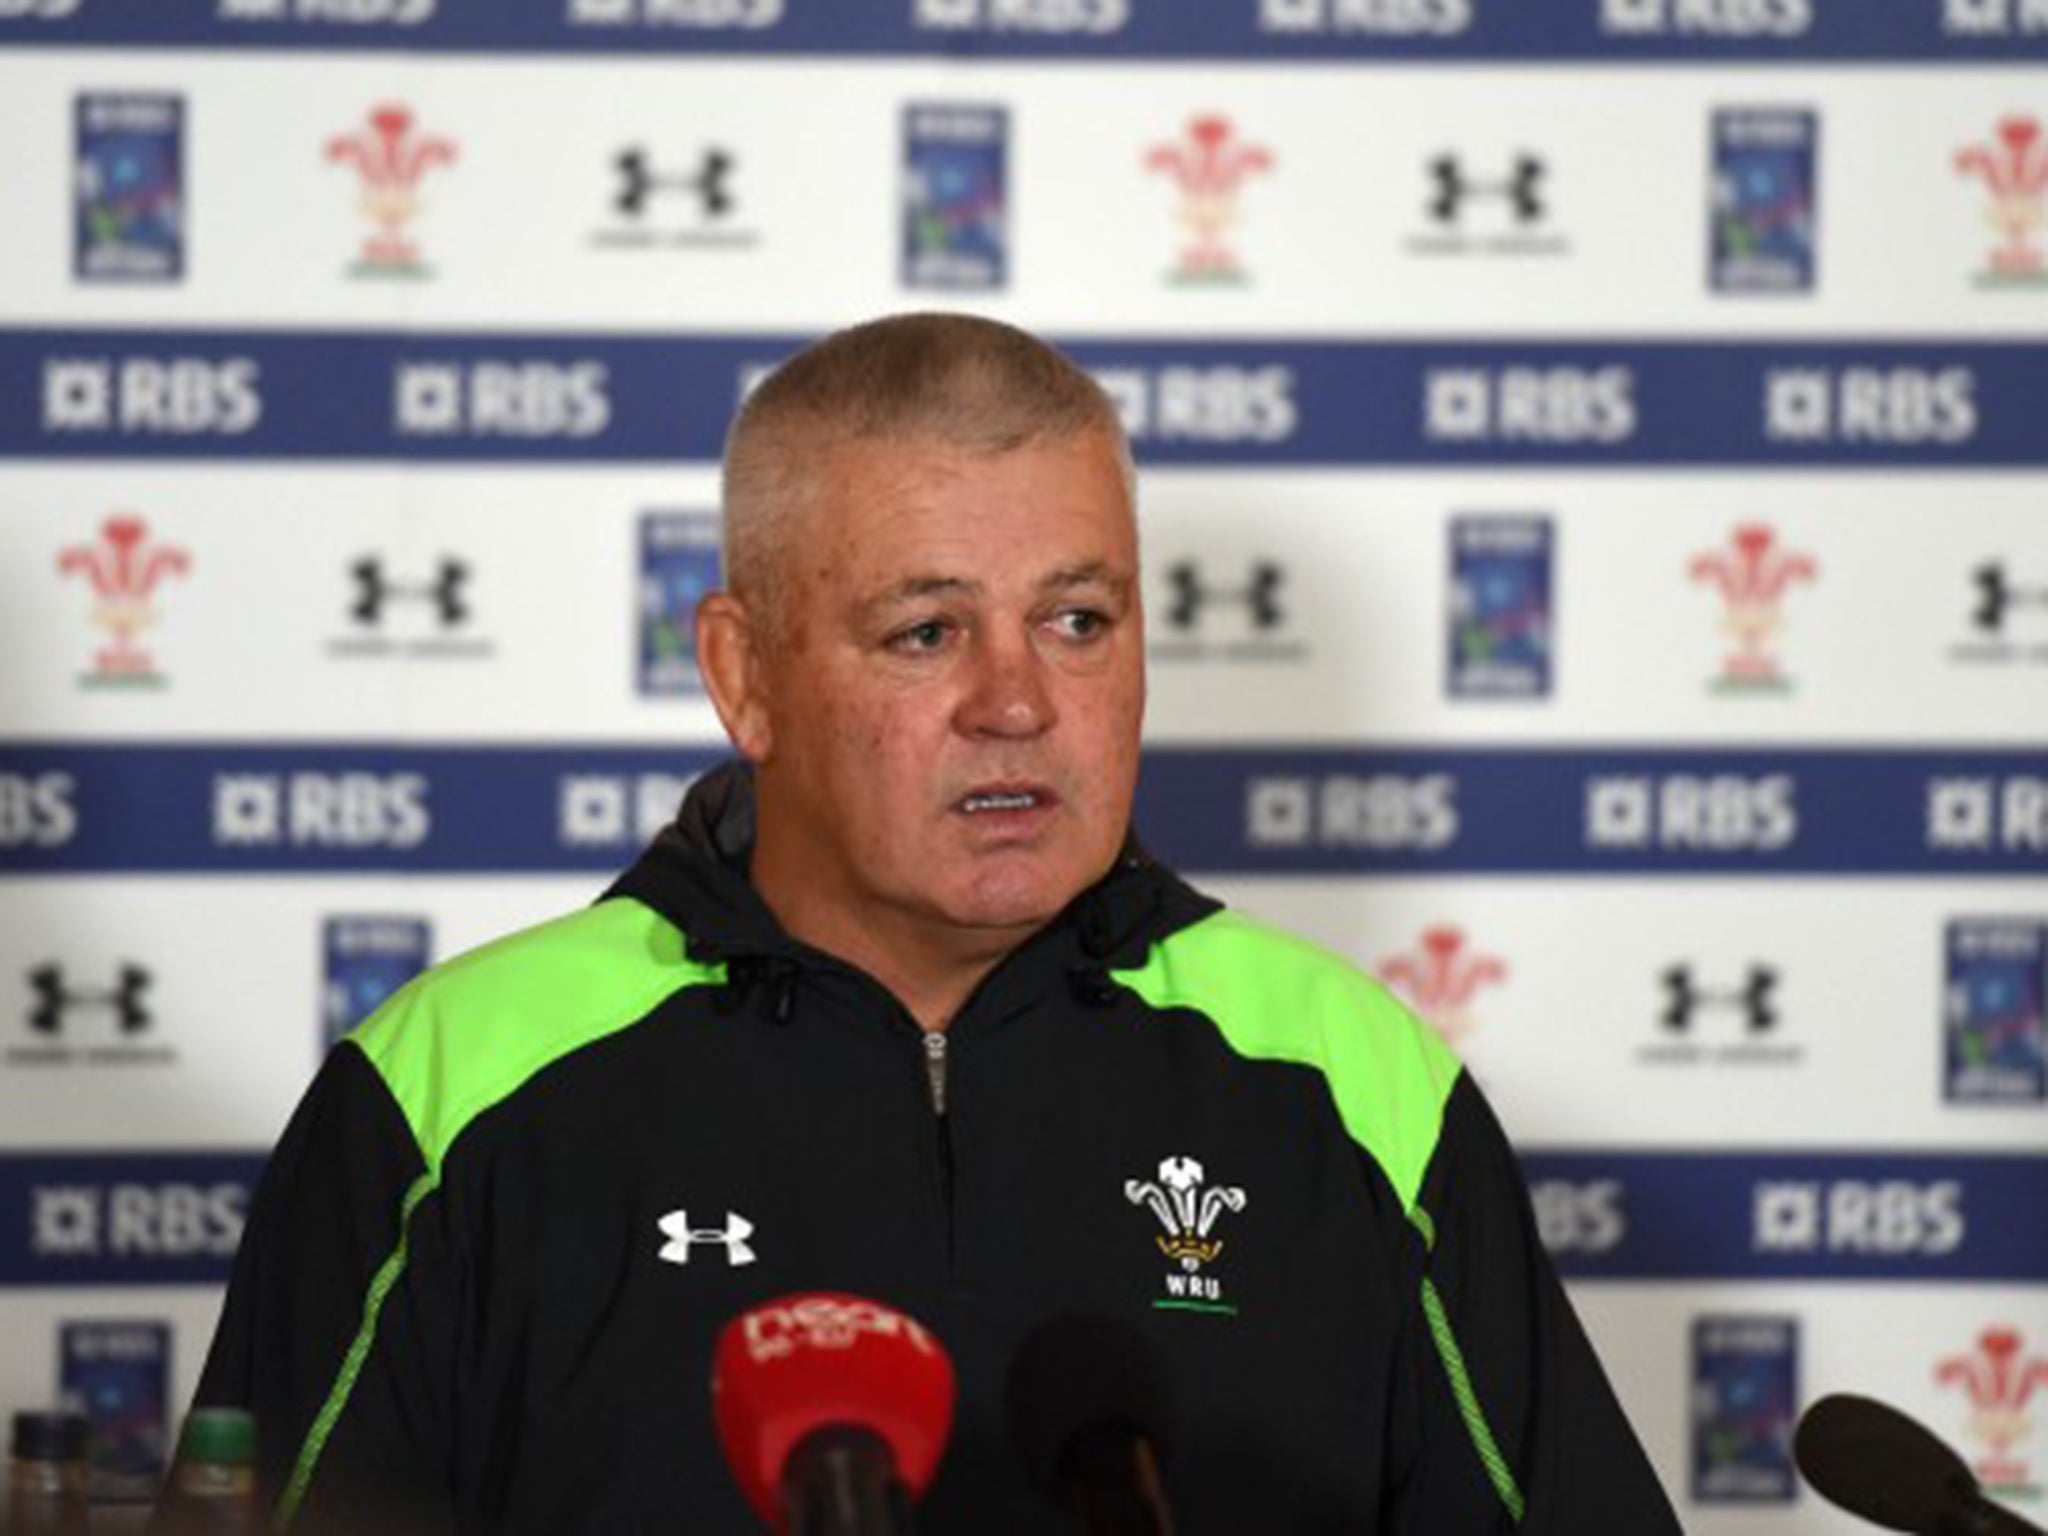 Warren Gatland, the Wales coach, unveiled his side 48 hours earlier than anticipated (Getty)